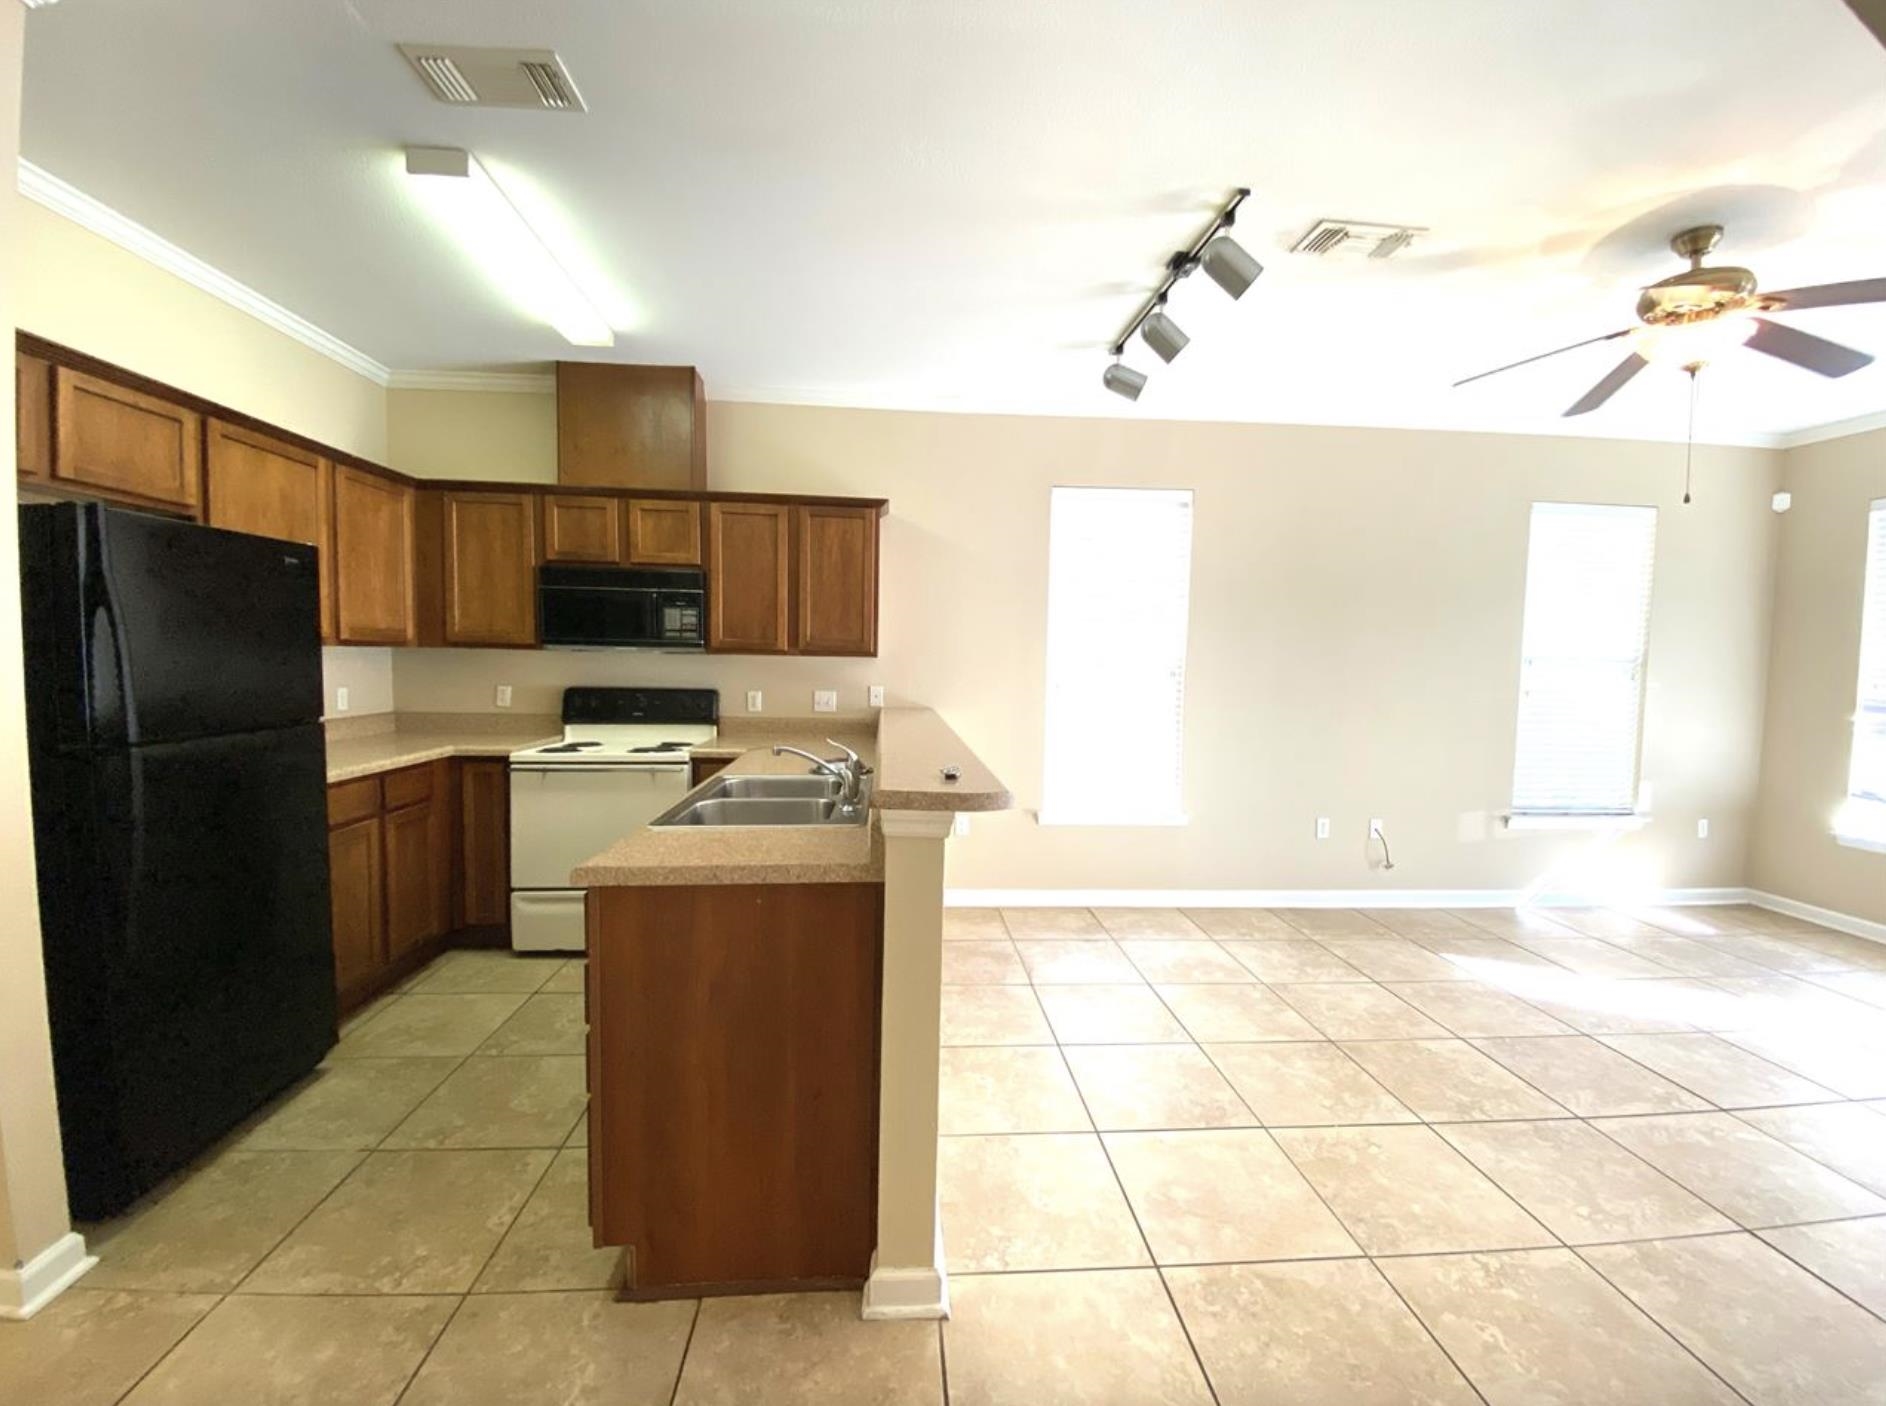 2400 Fred Smith Road,TALLAHASSEE,Florida 32303,3 Bedrooms Bedrooms,3 BathroomsBathrooms,Condo,2400 Fred Smith Road,363717